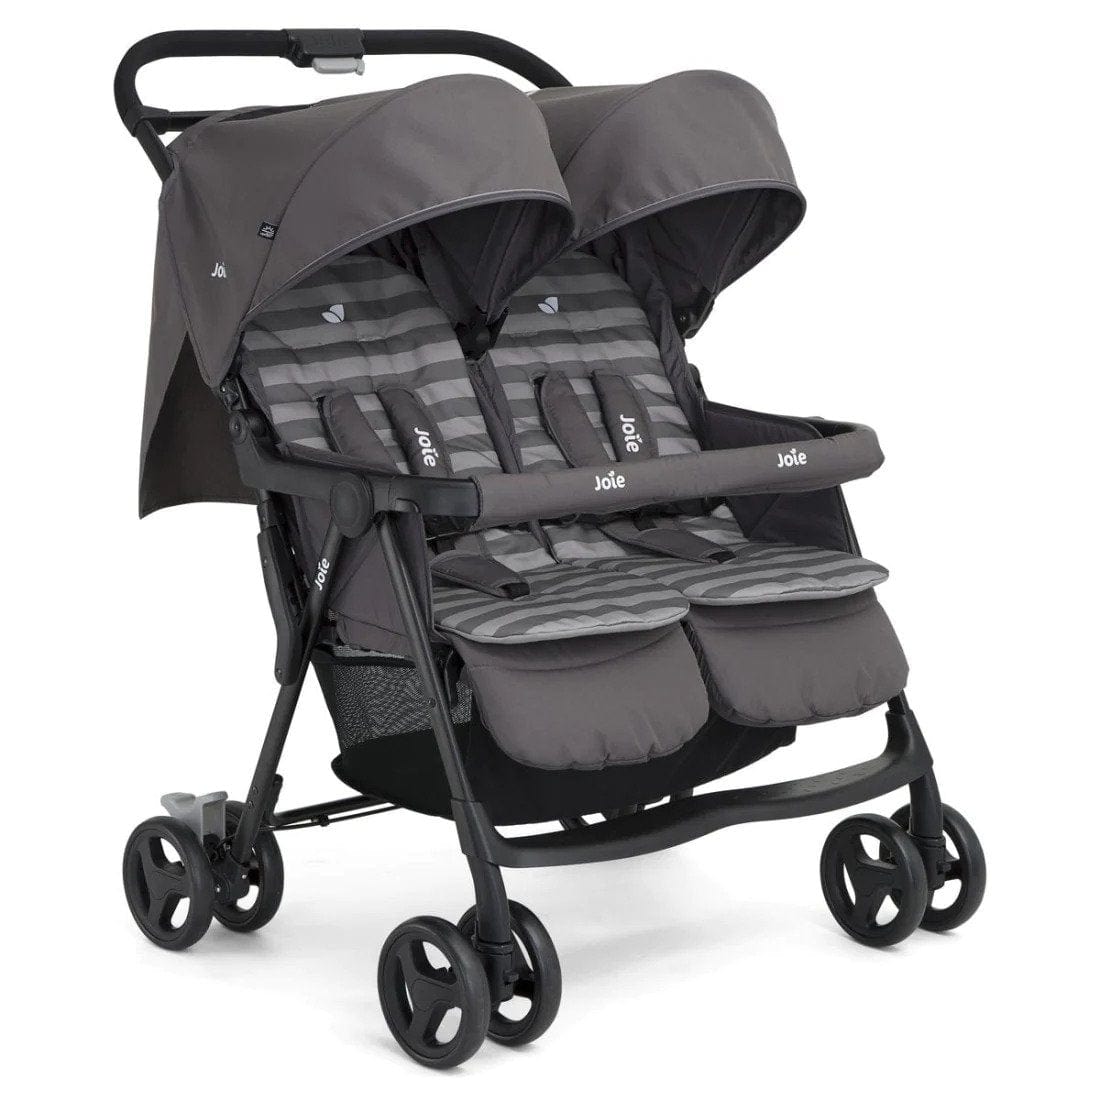 Joie double buggies Joie Aire Twin Stroller (inc footmuff & raincover) - Dark Pewter S1217AHDPW000